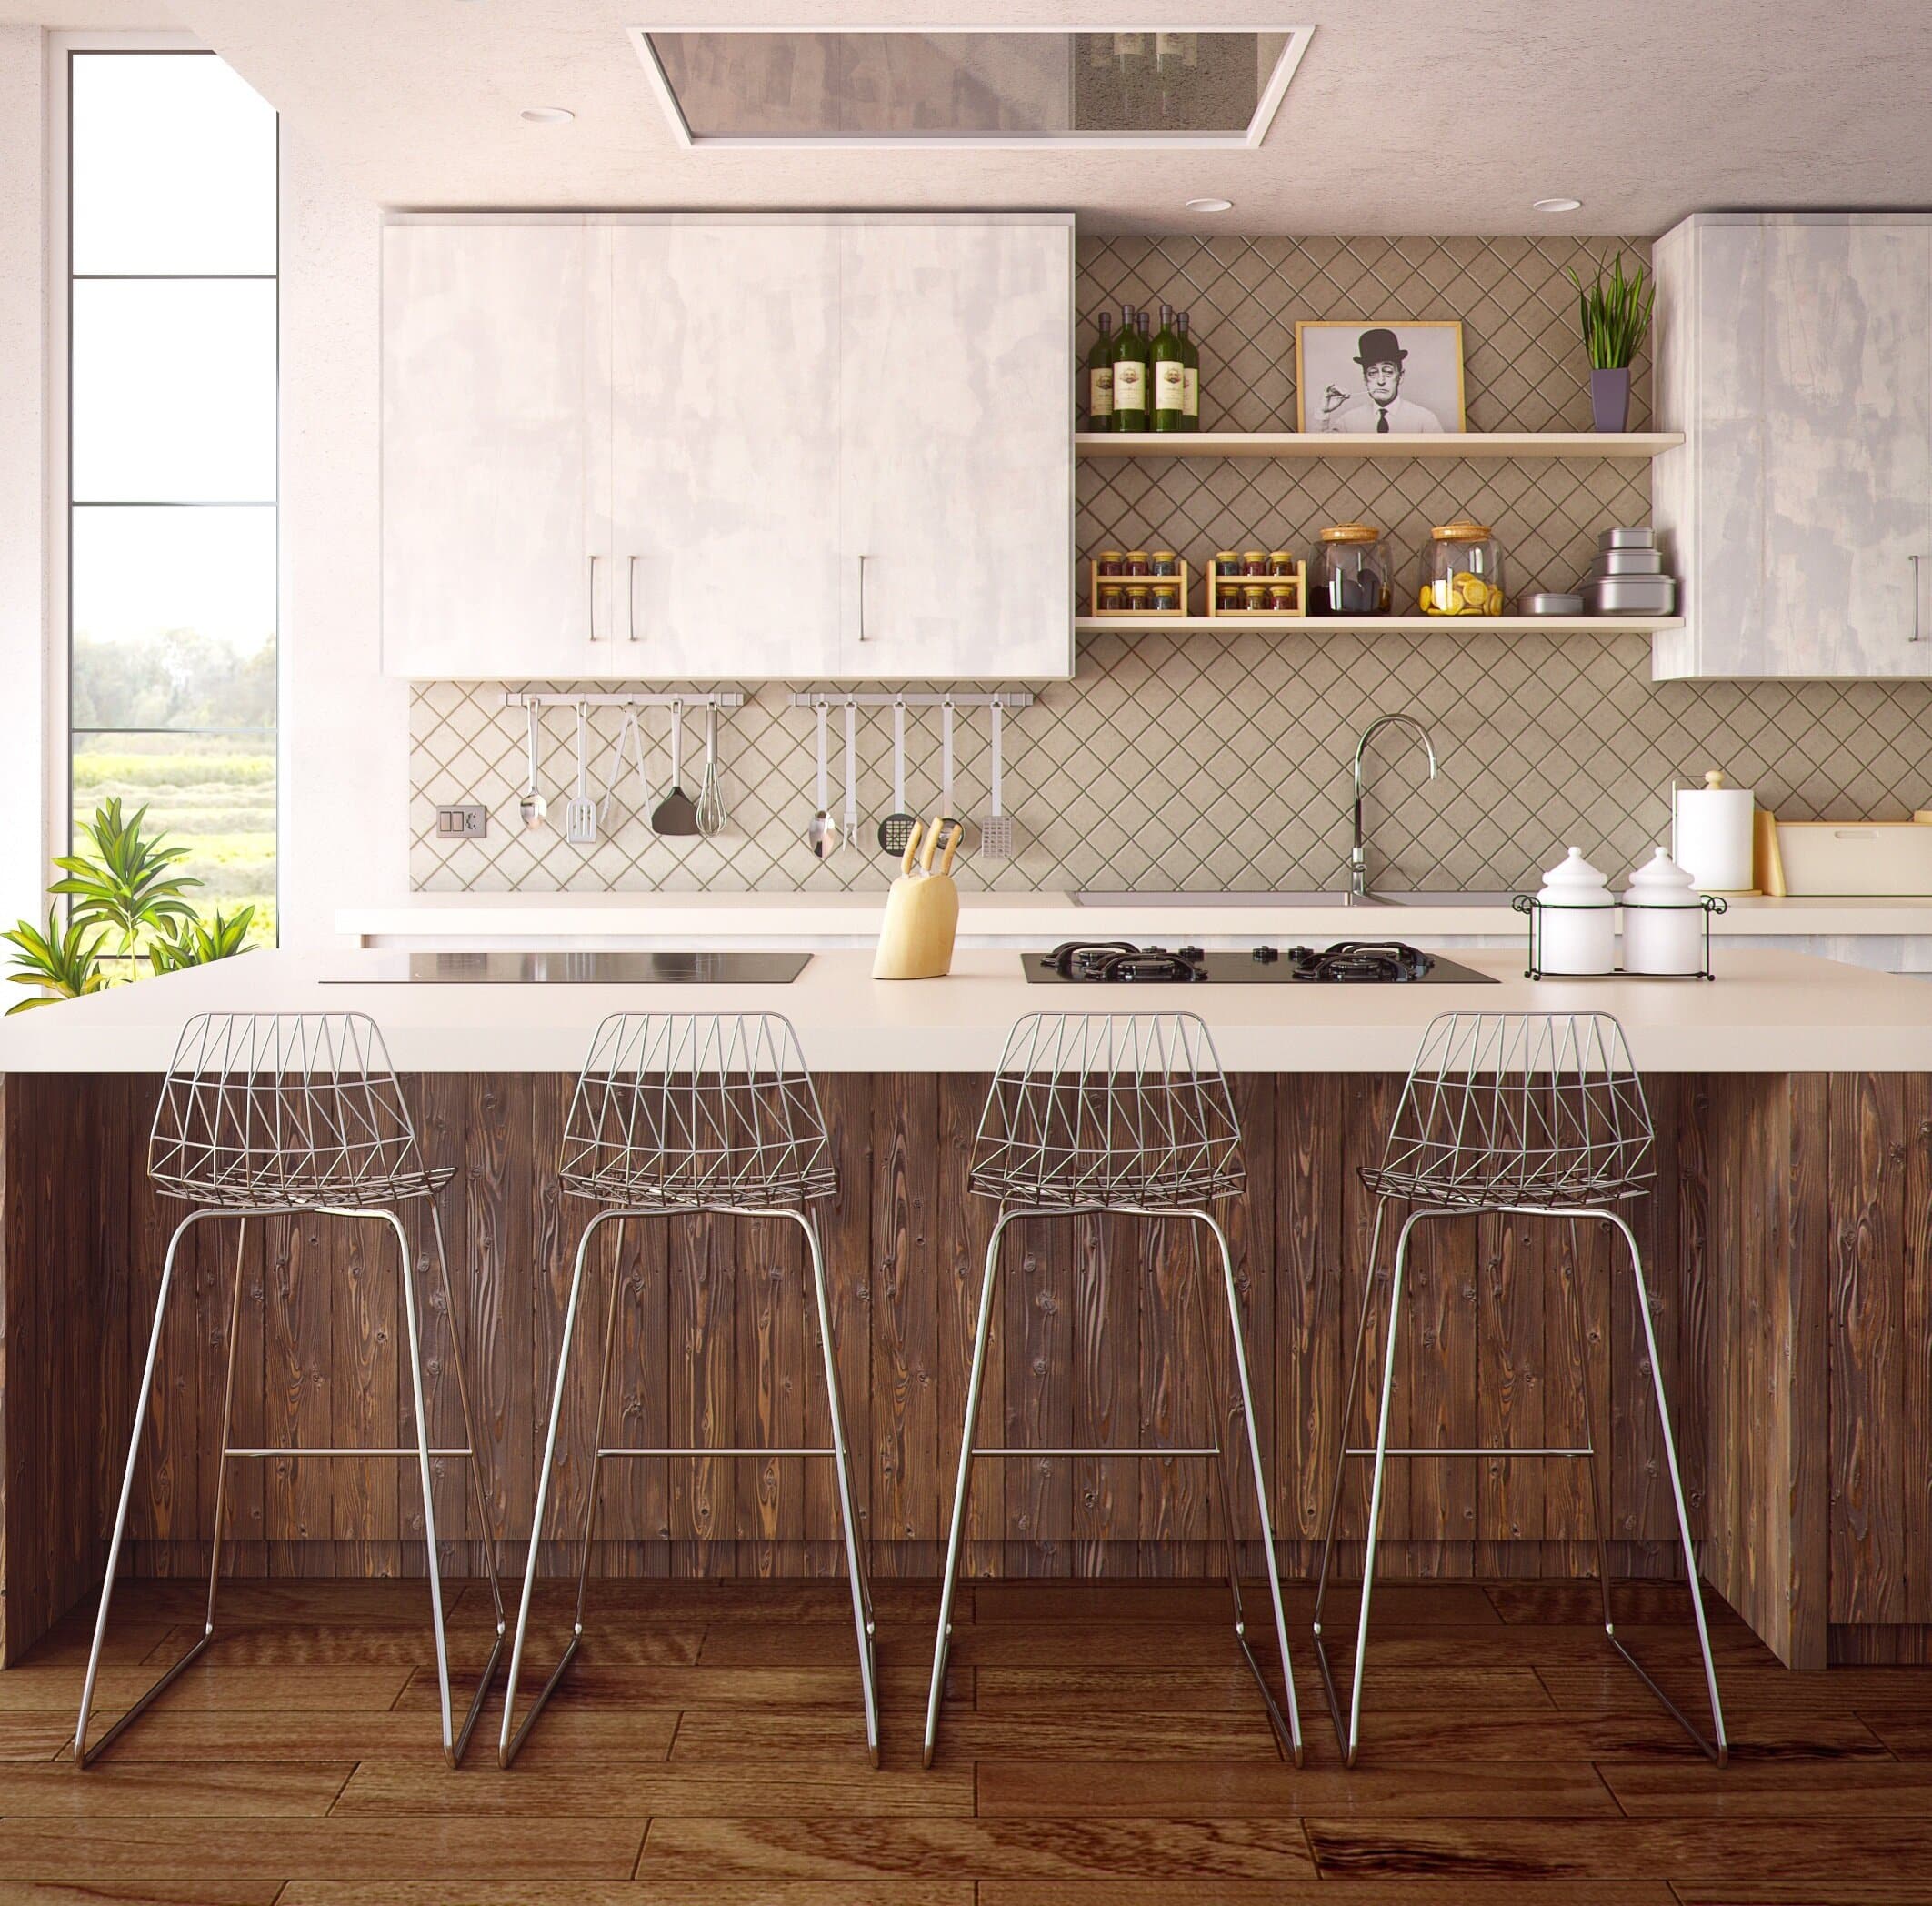 Canva - Four Gray Bar Stools in Front of Kitchen Countertop.jpg